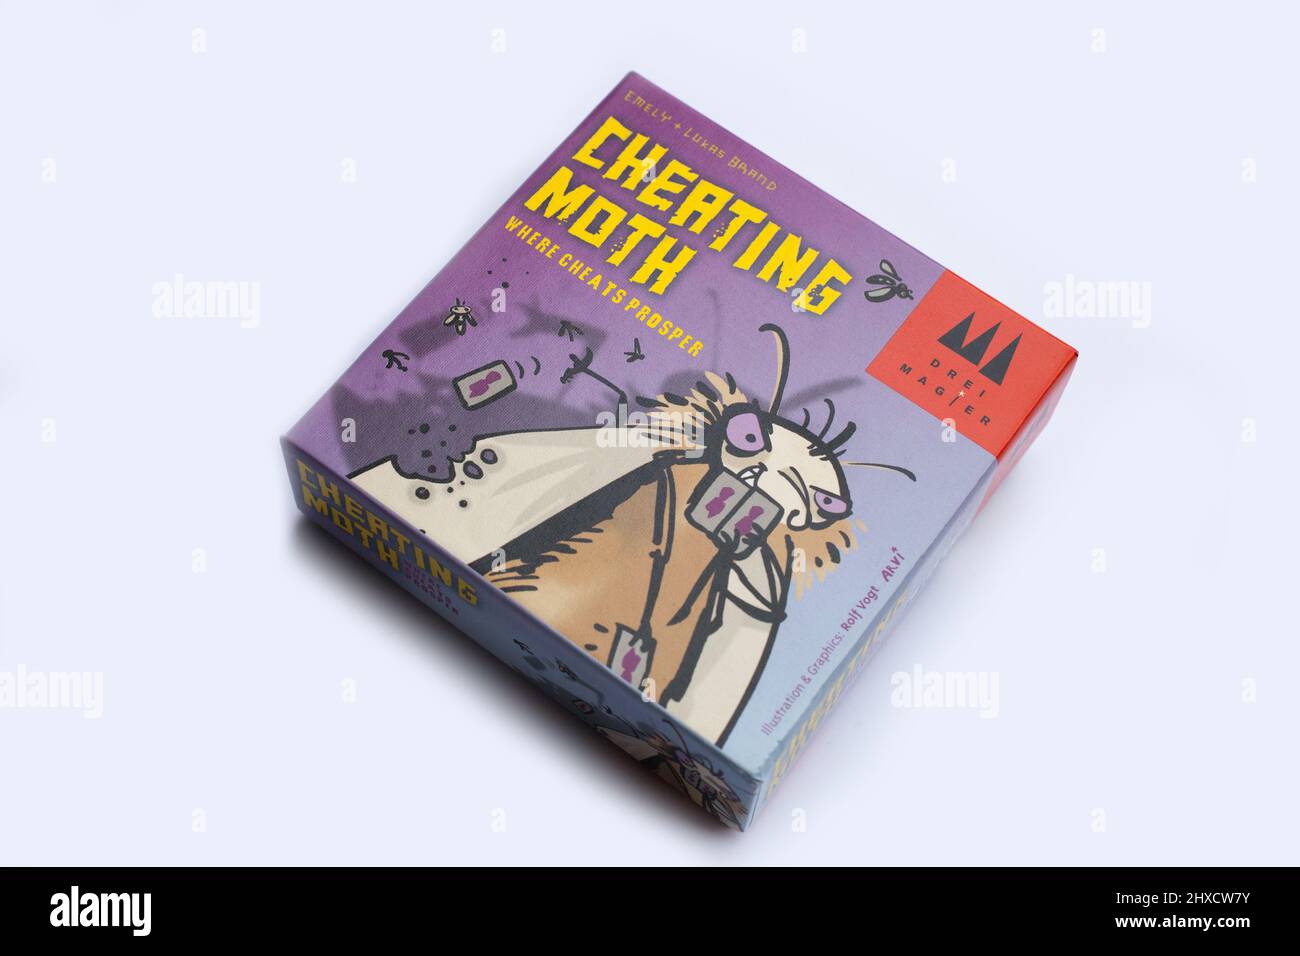 https://c8.alamy.com/comp/2HXCW7Y/the-card-game-cheating-moth-2HXCW7Y.jpg